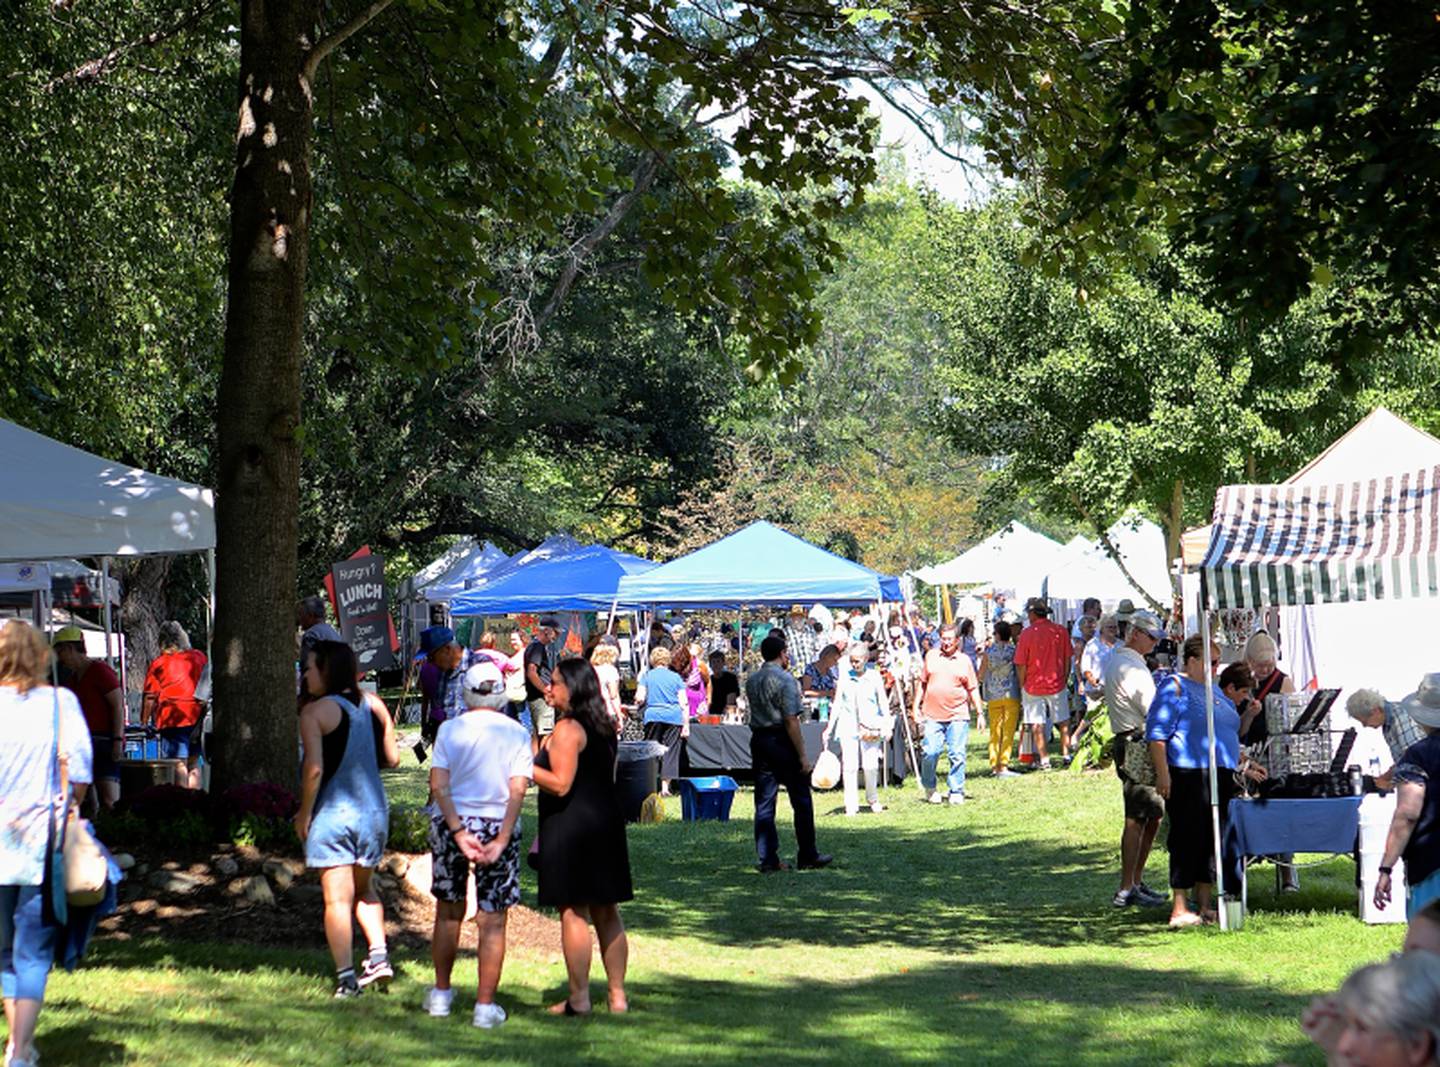 The 9th Annual Artisan Market will return to Hornbaker Gardens from 10 a.m. to 4 p.m.  on Saturday, Sept. 17.